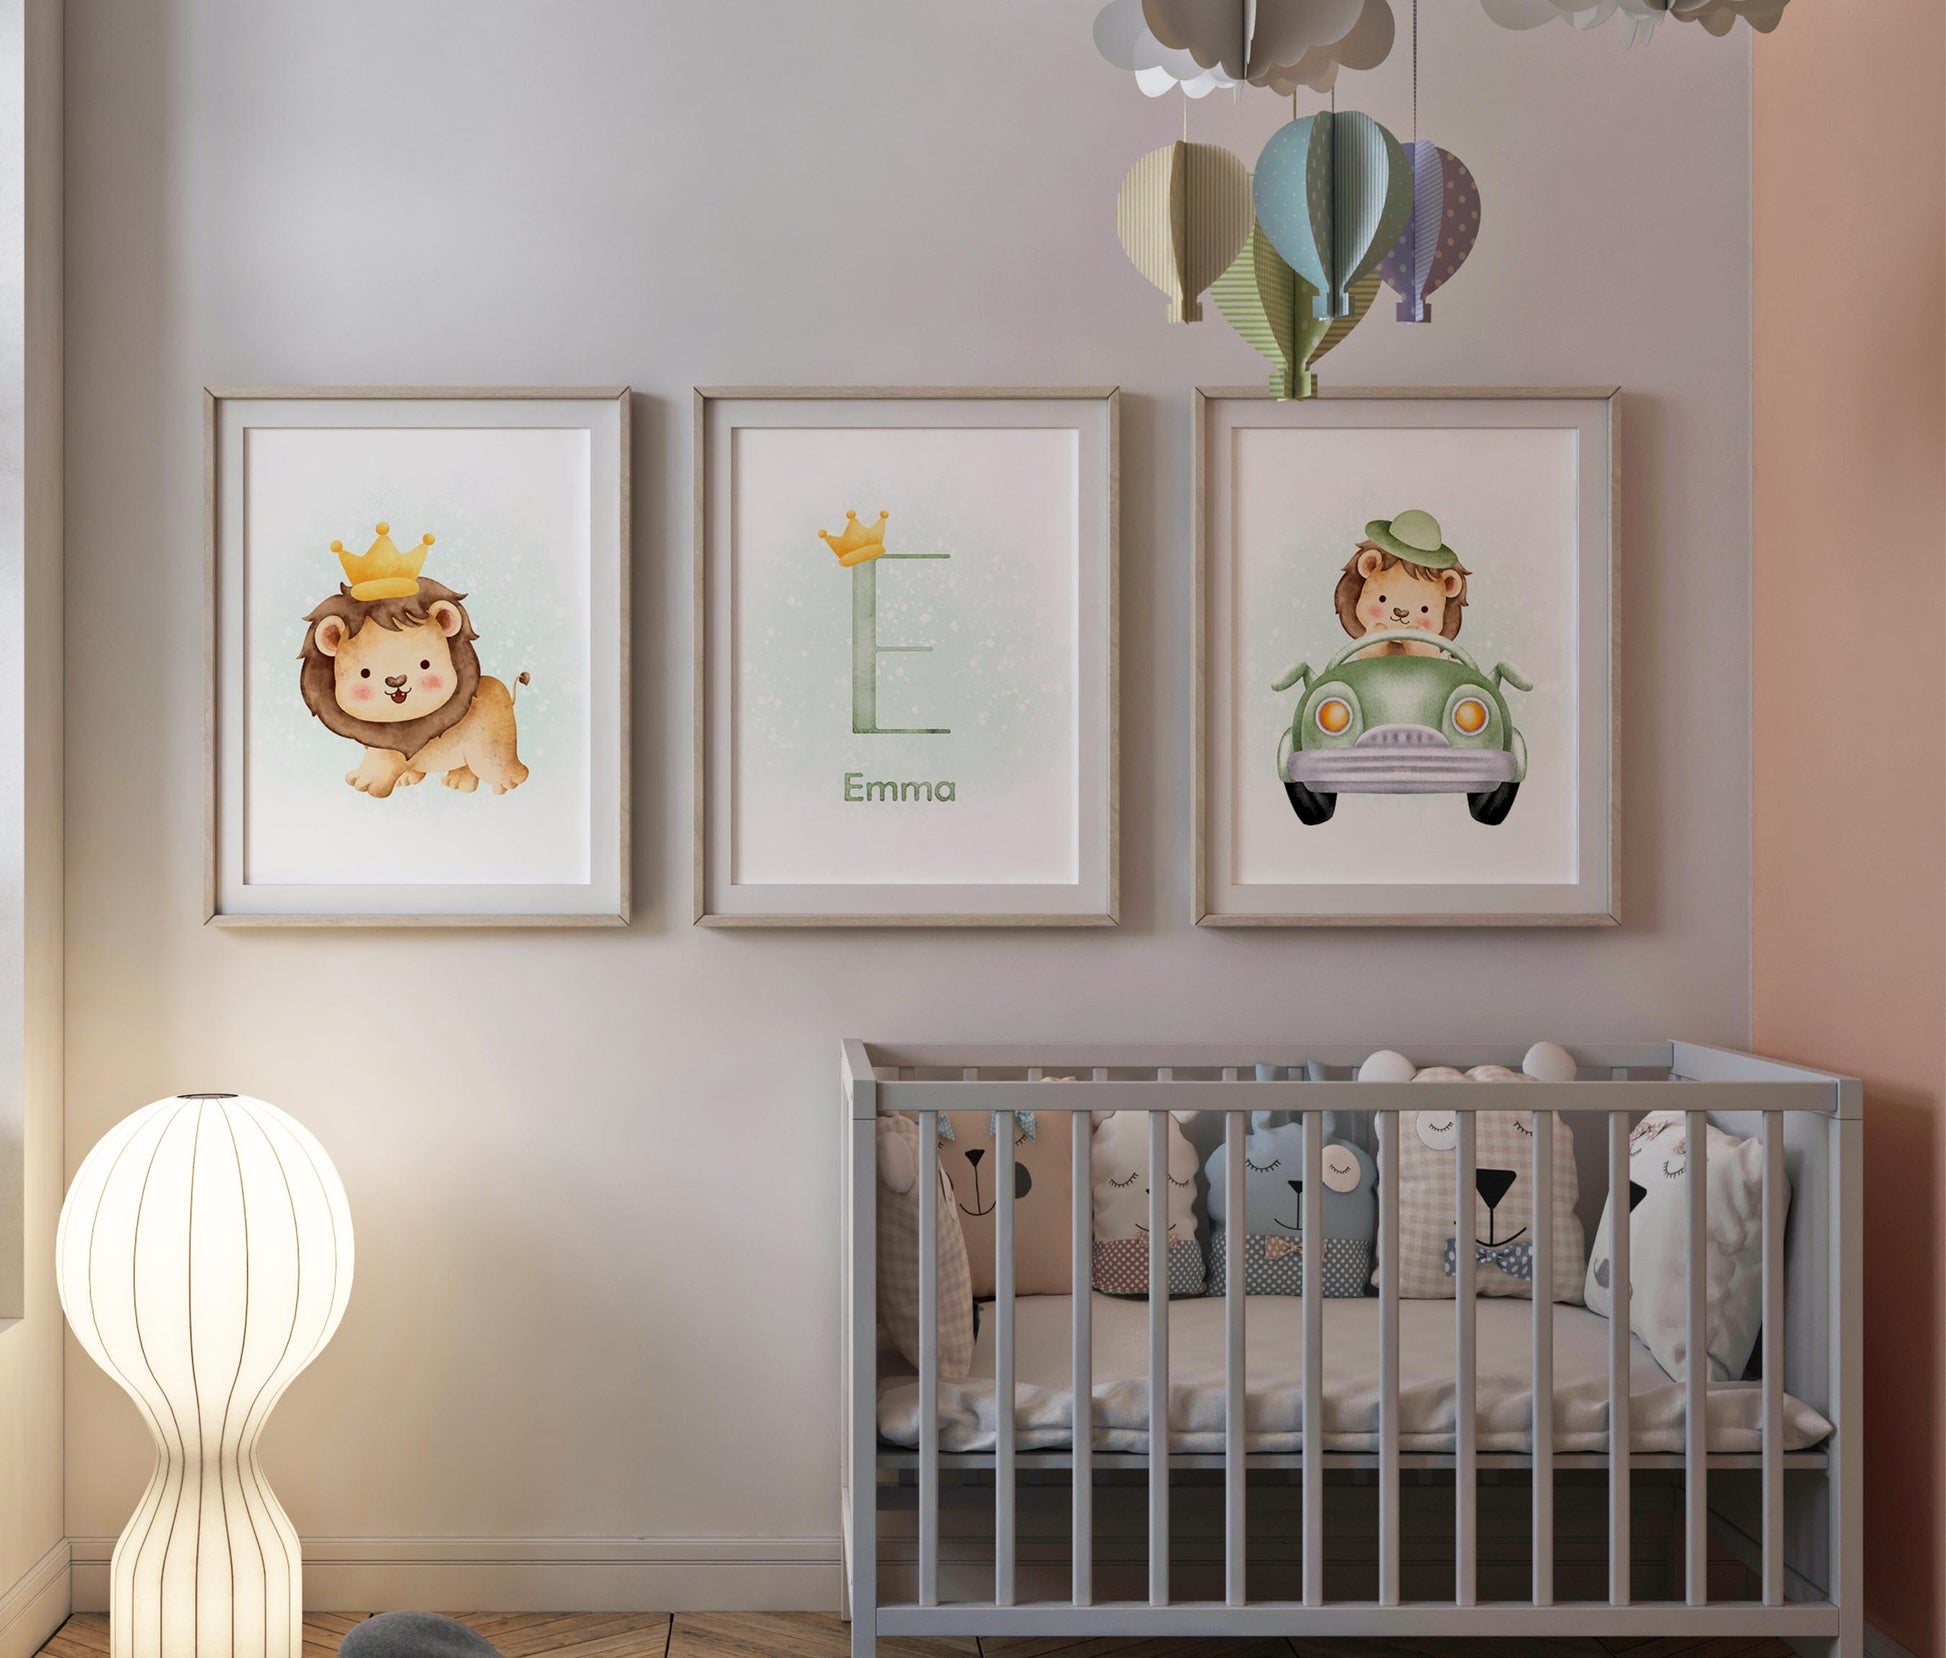 Set of 3 Personalized Name Initial Baby Shower Prints on wall for room decor.